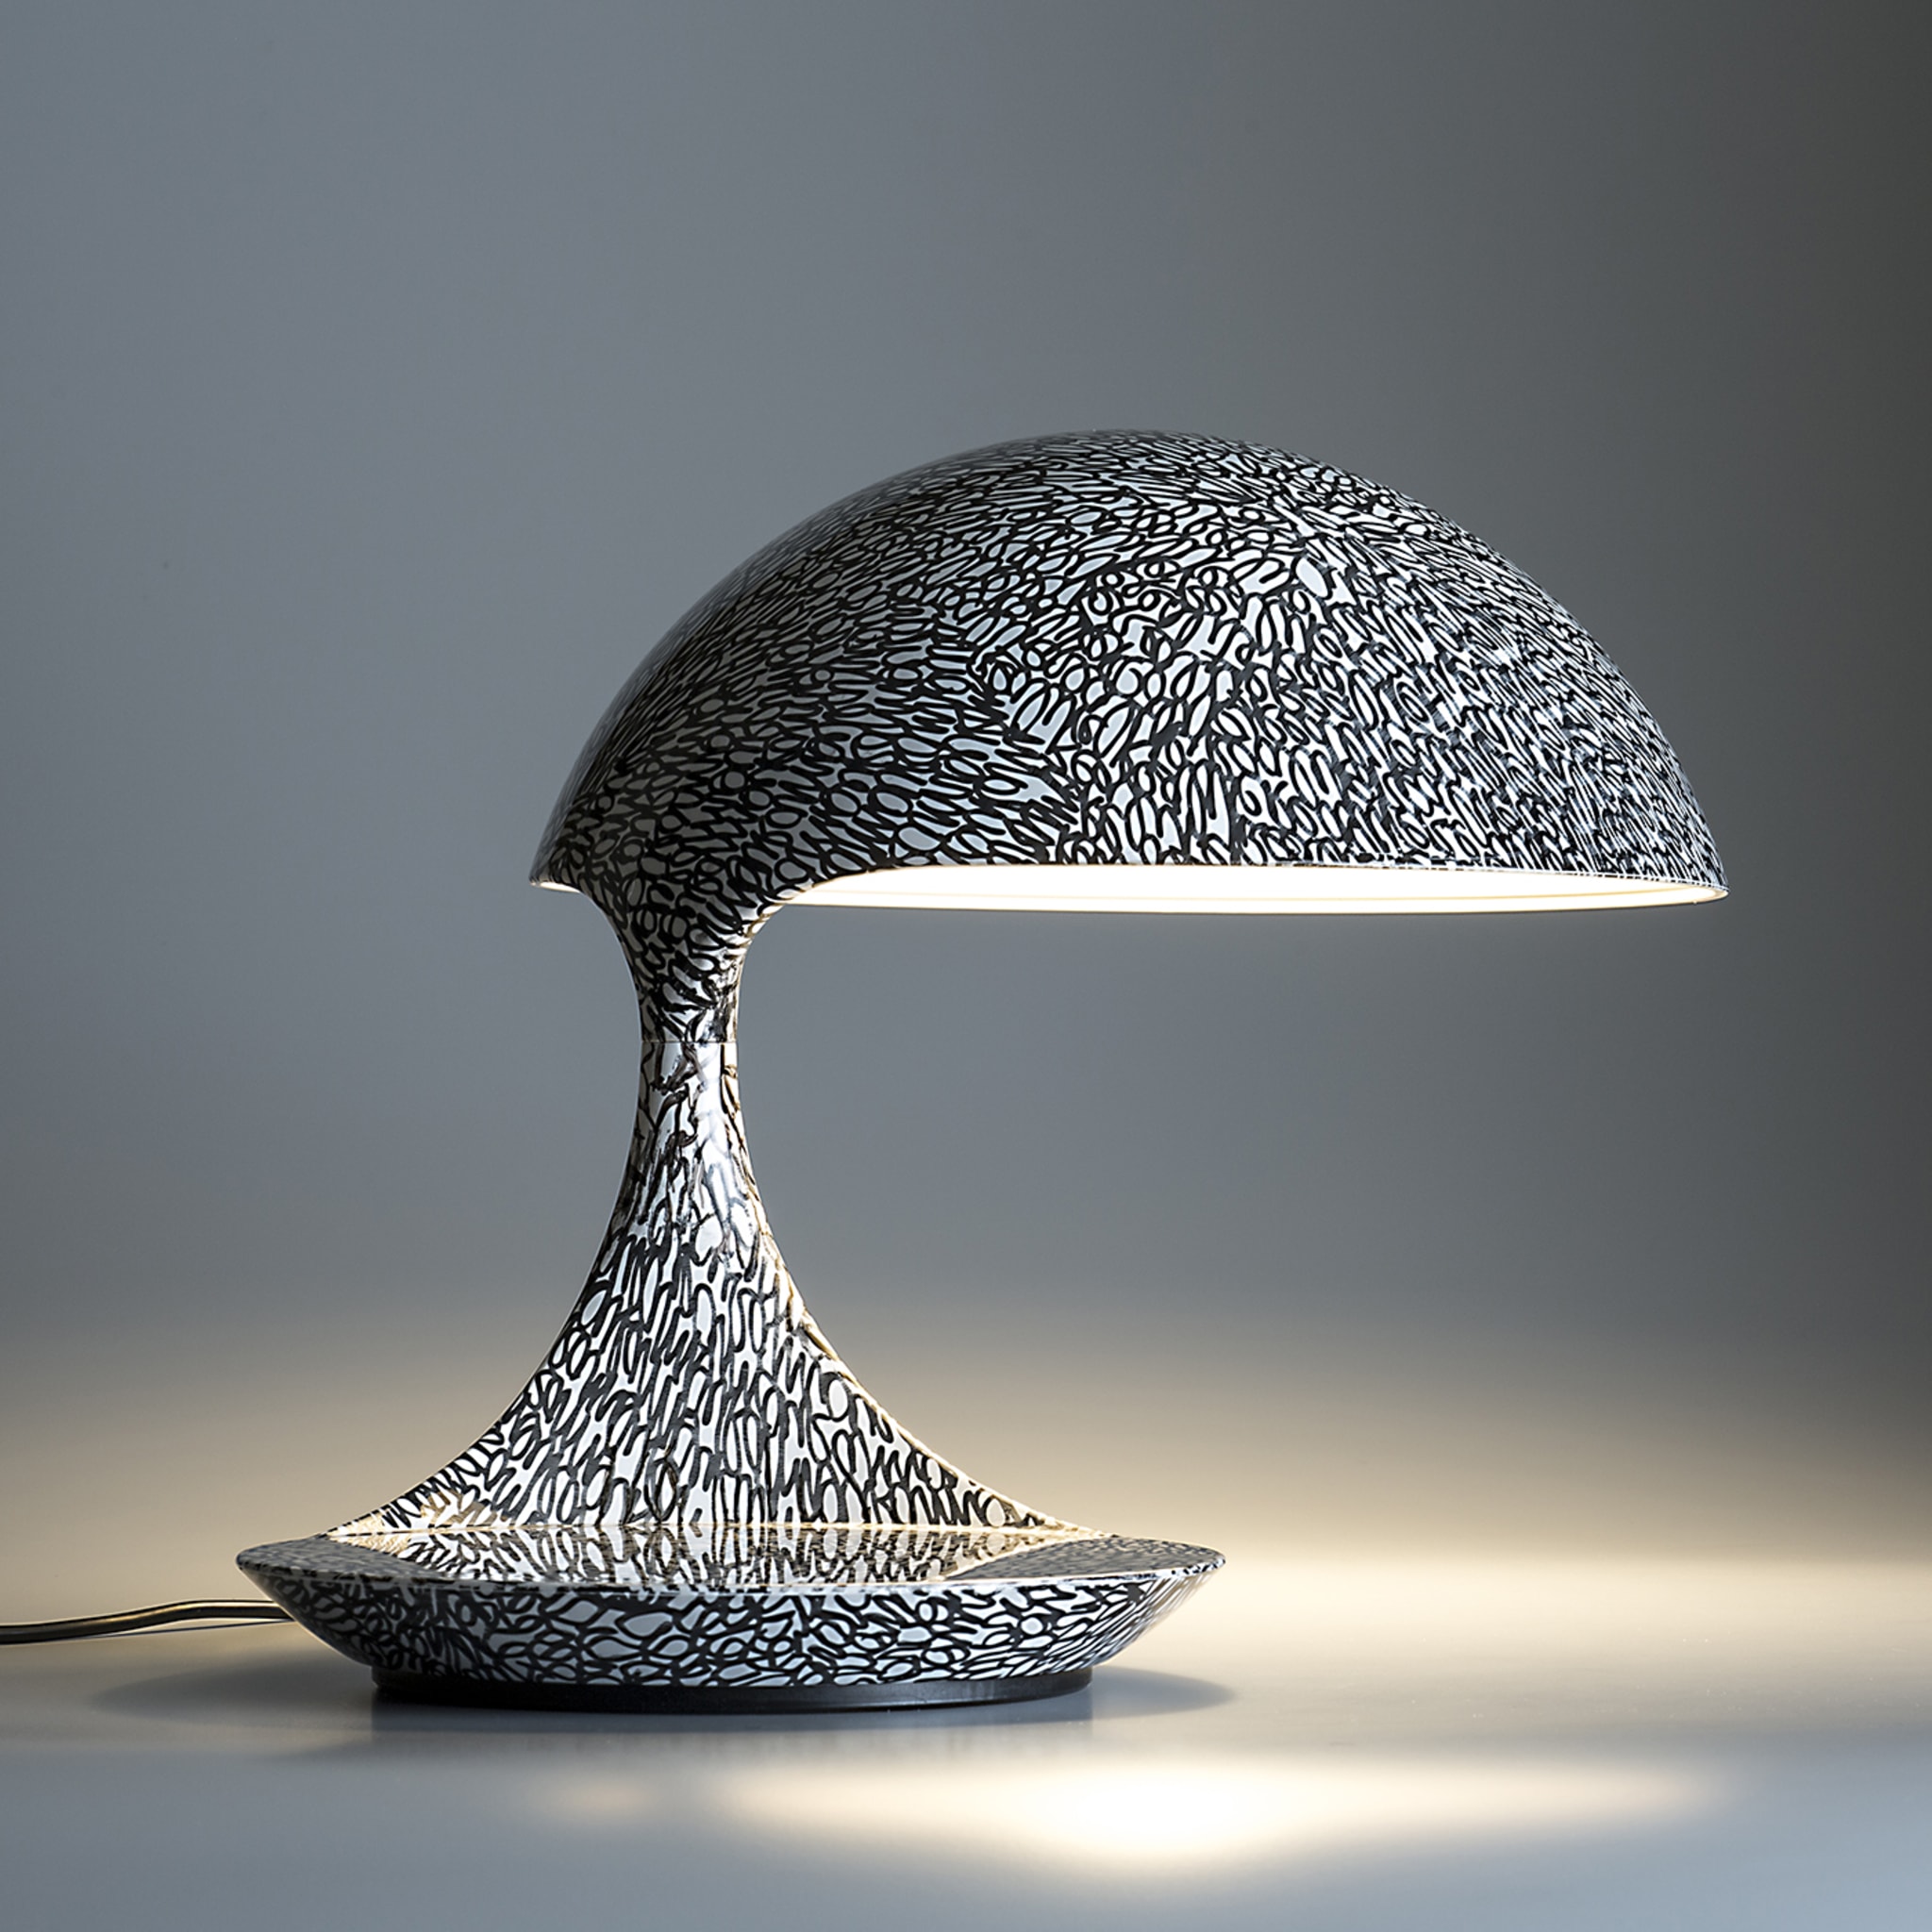 Cobra Texture Black-And-White Table Lamp by A. Femia & A. Simony - Alternative view 2